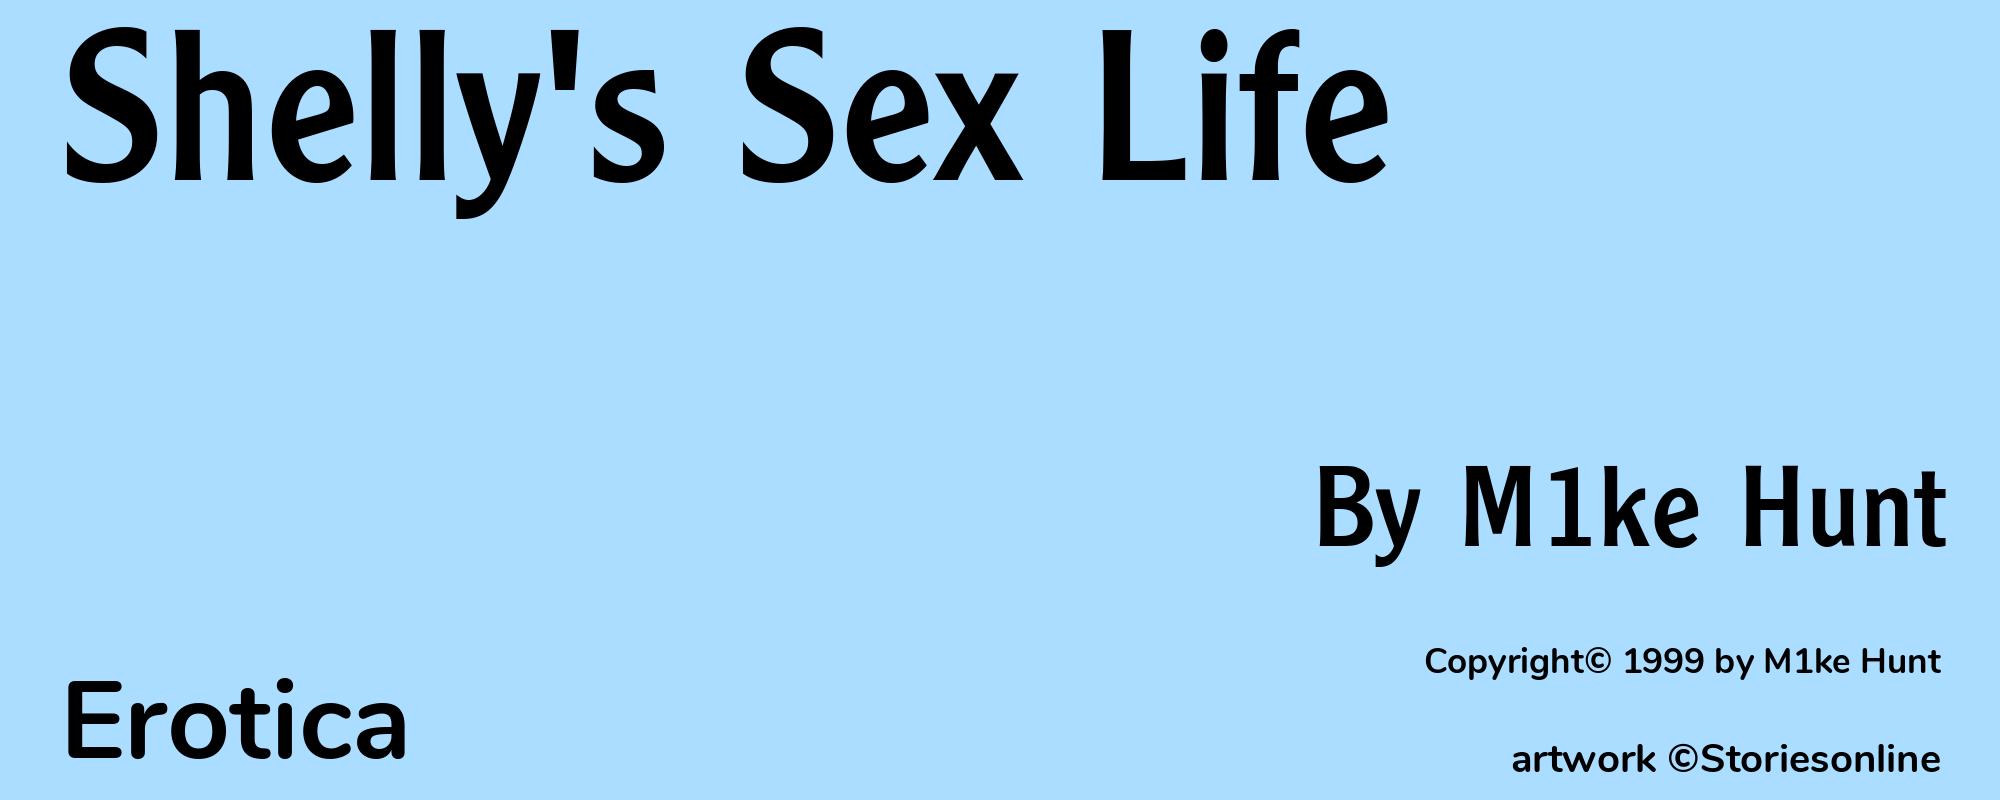 Shelly's Sex Life - Cover